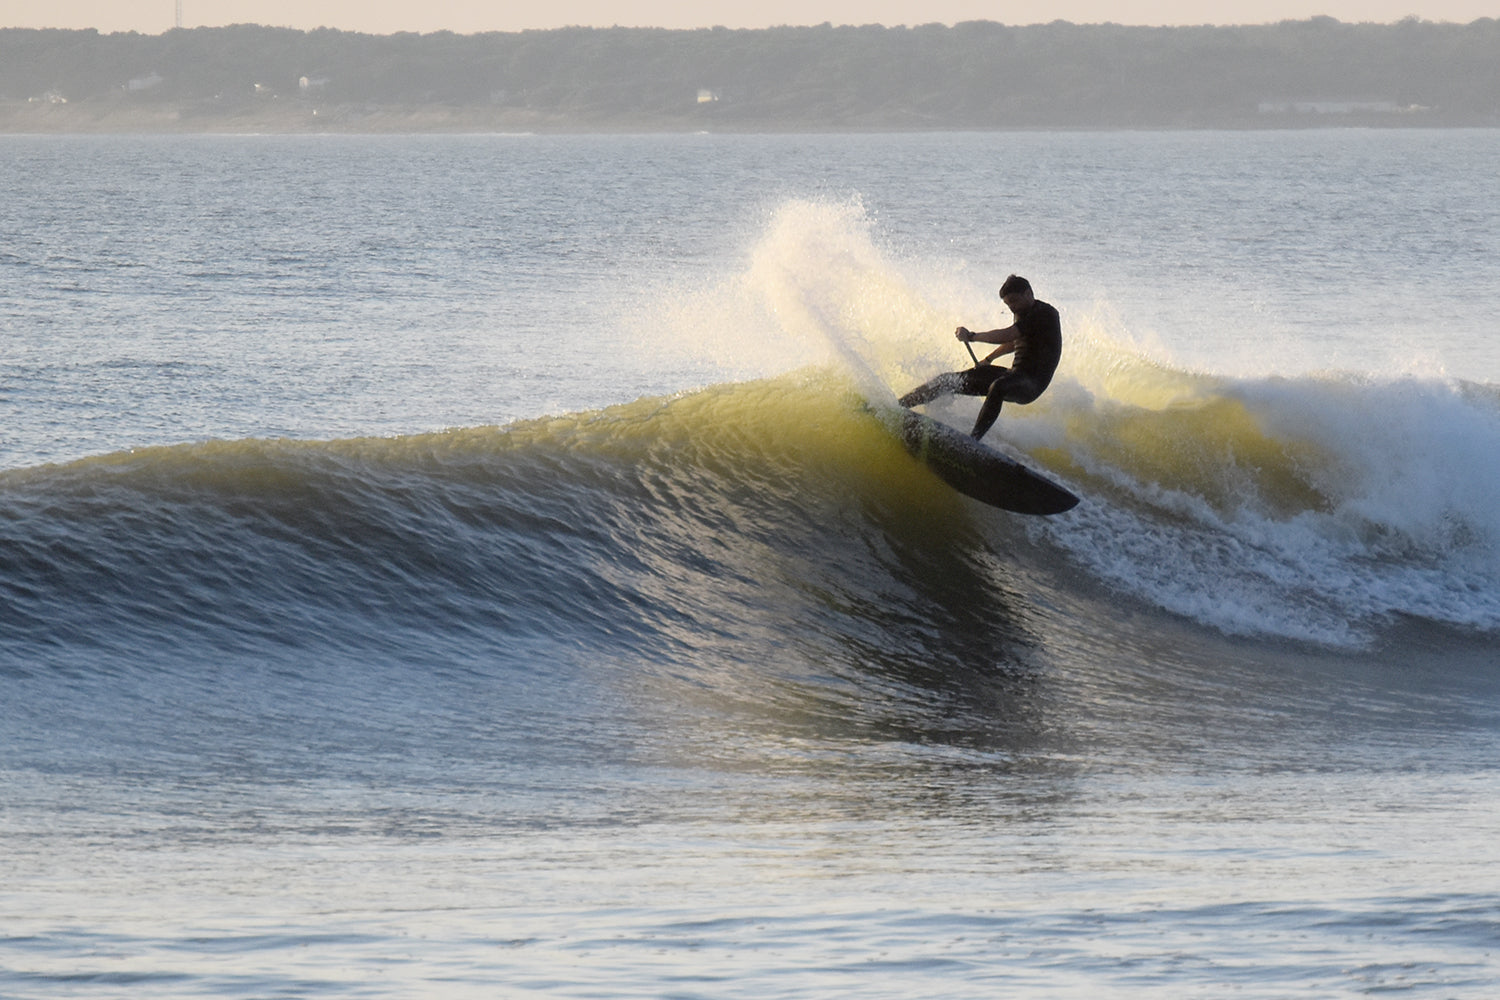 PHOTO: TOP TURN WITH THE ALLEY FSP PRO